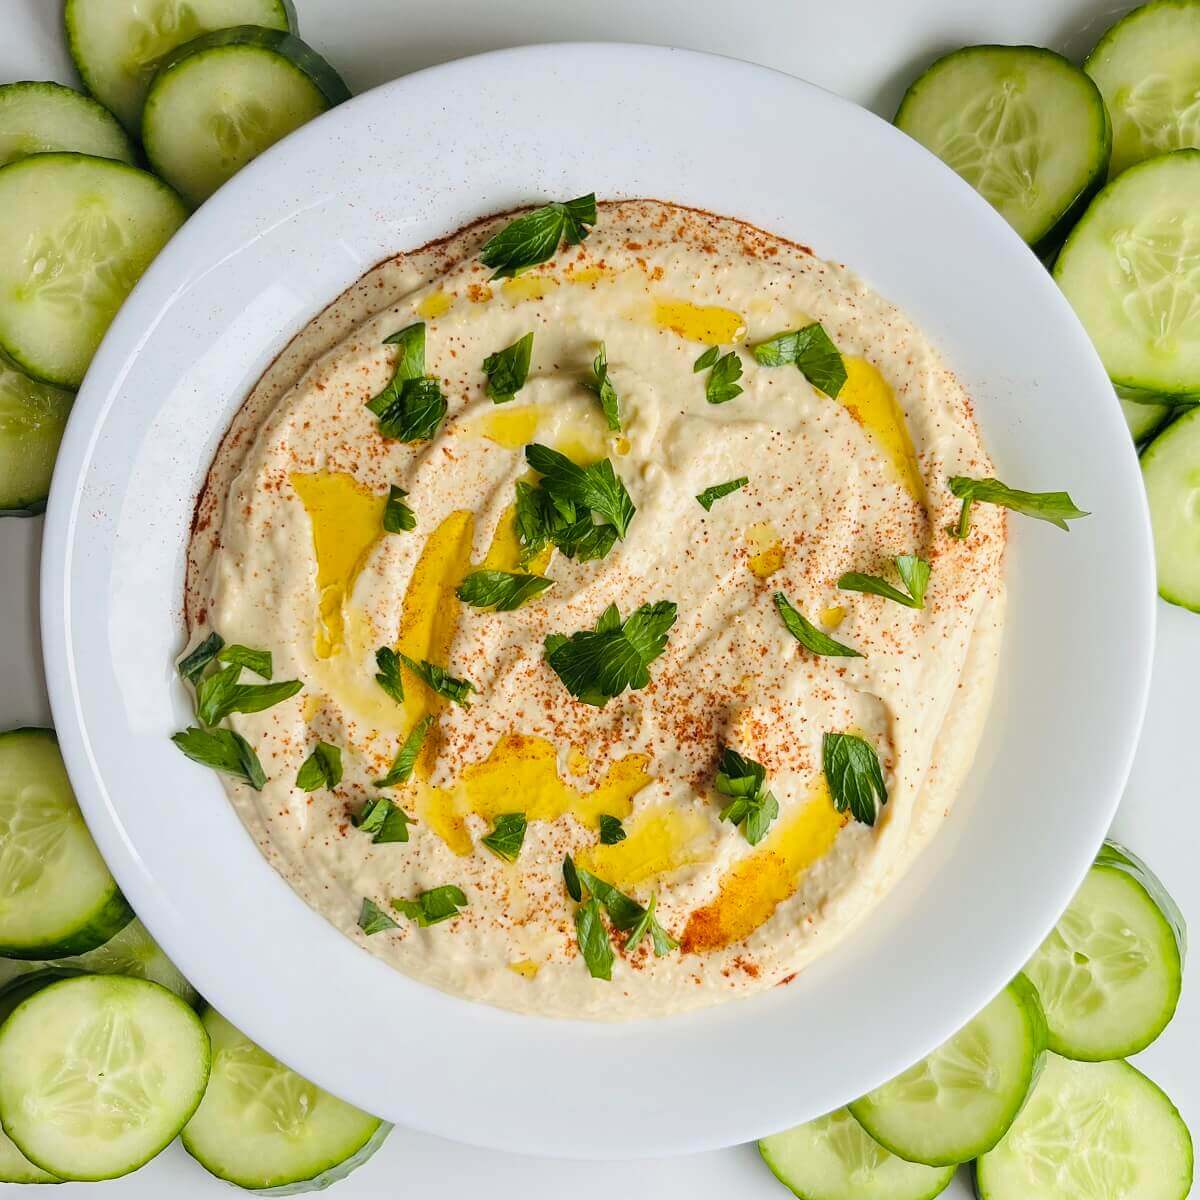 High protein hummus in a white dish surrounded by cucumber slices.